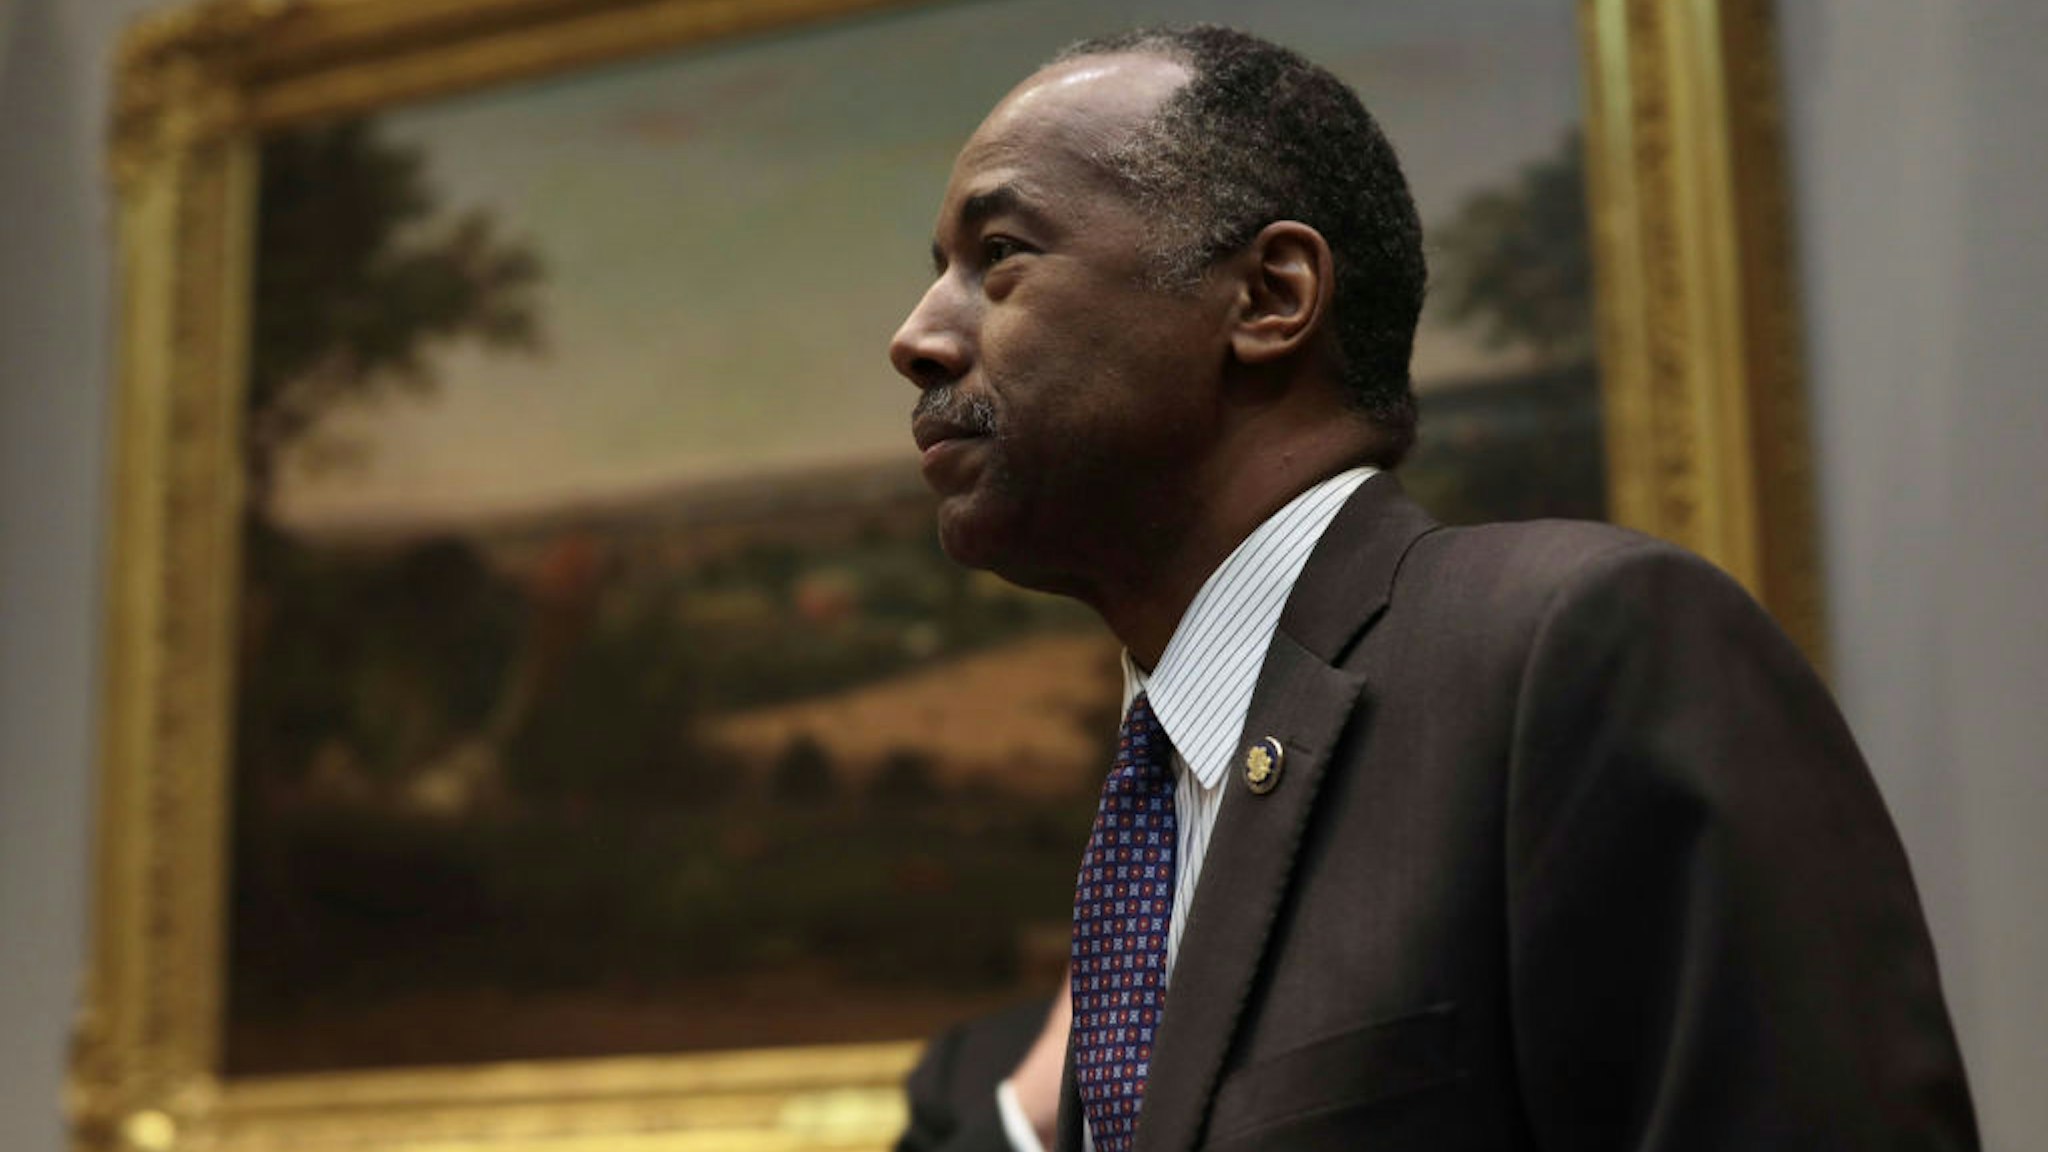 U.S. Housing and Urban Development Secretary Ben Carson arrives at a Roosevelt Room event at the White House February 6, 2019 in Washington, DC.